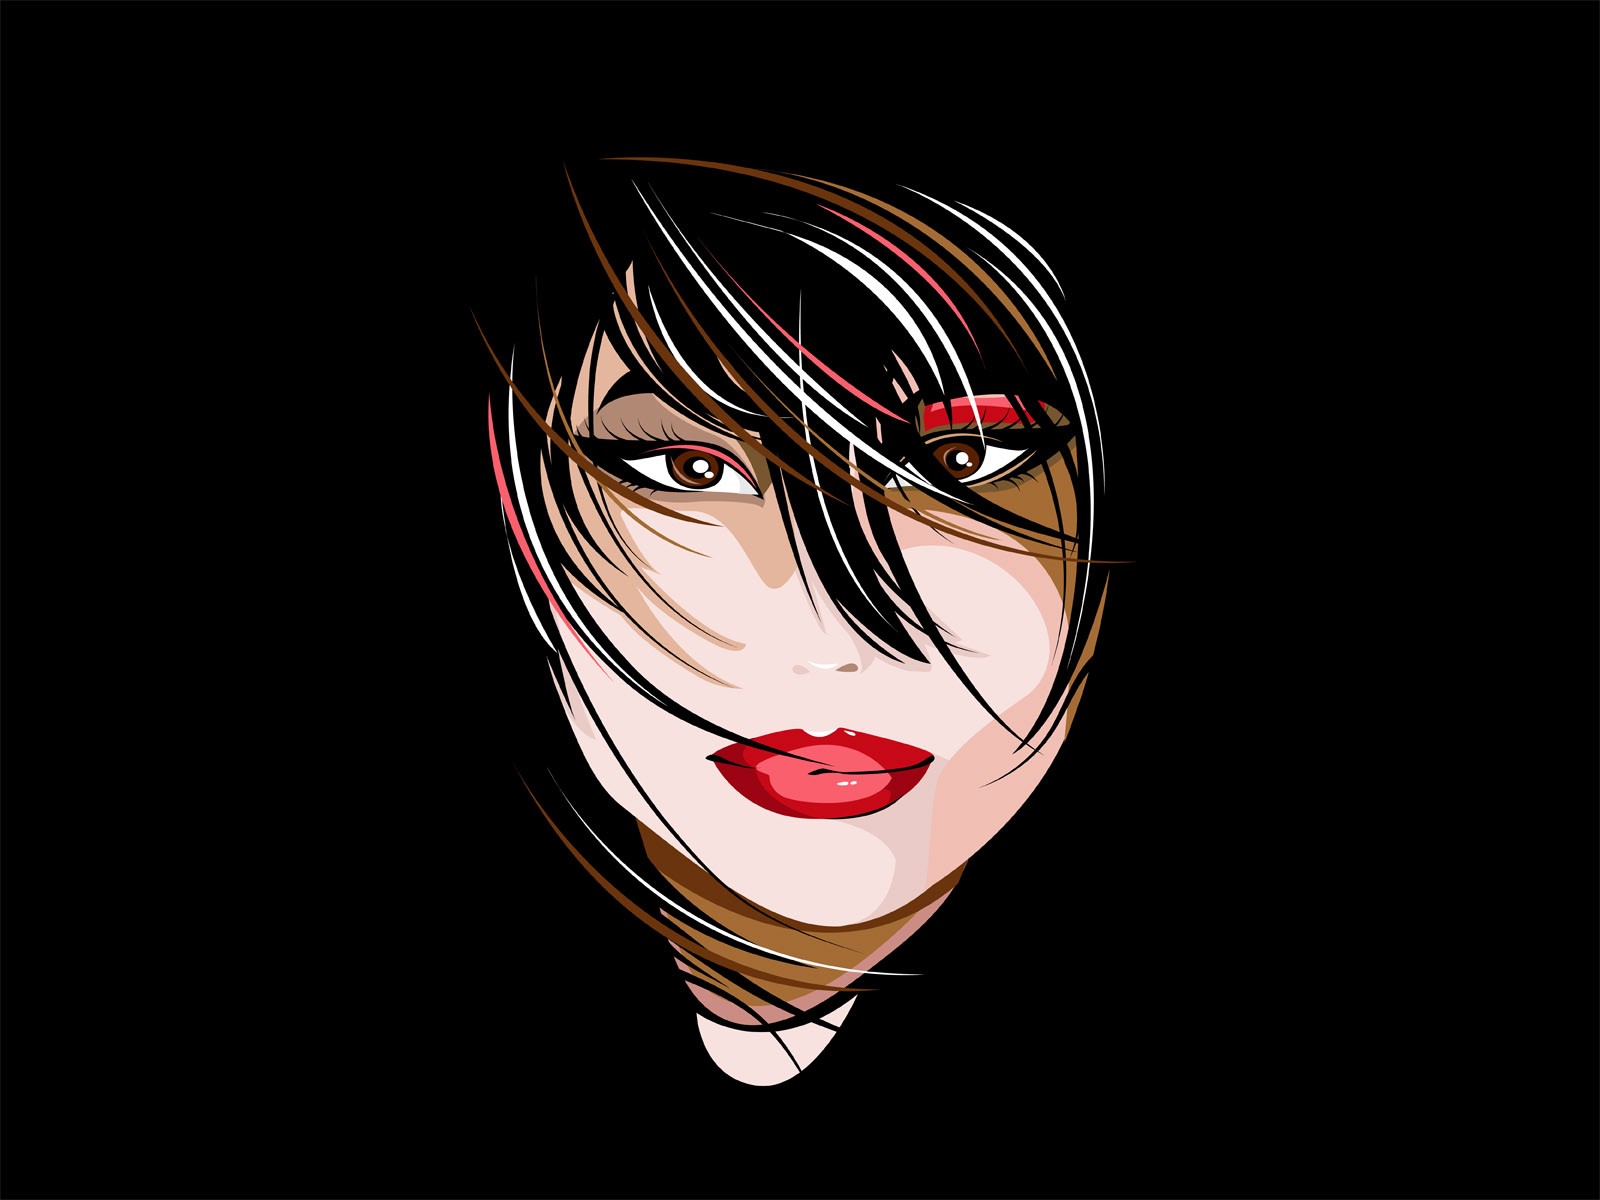 General 1600x1200 artwork women face red lipstick simple background brown eyes hair in face black background lipstick